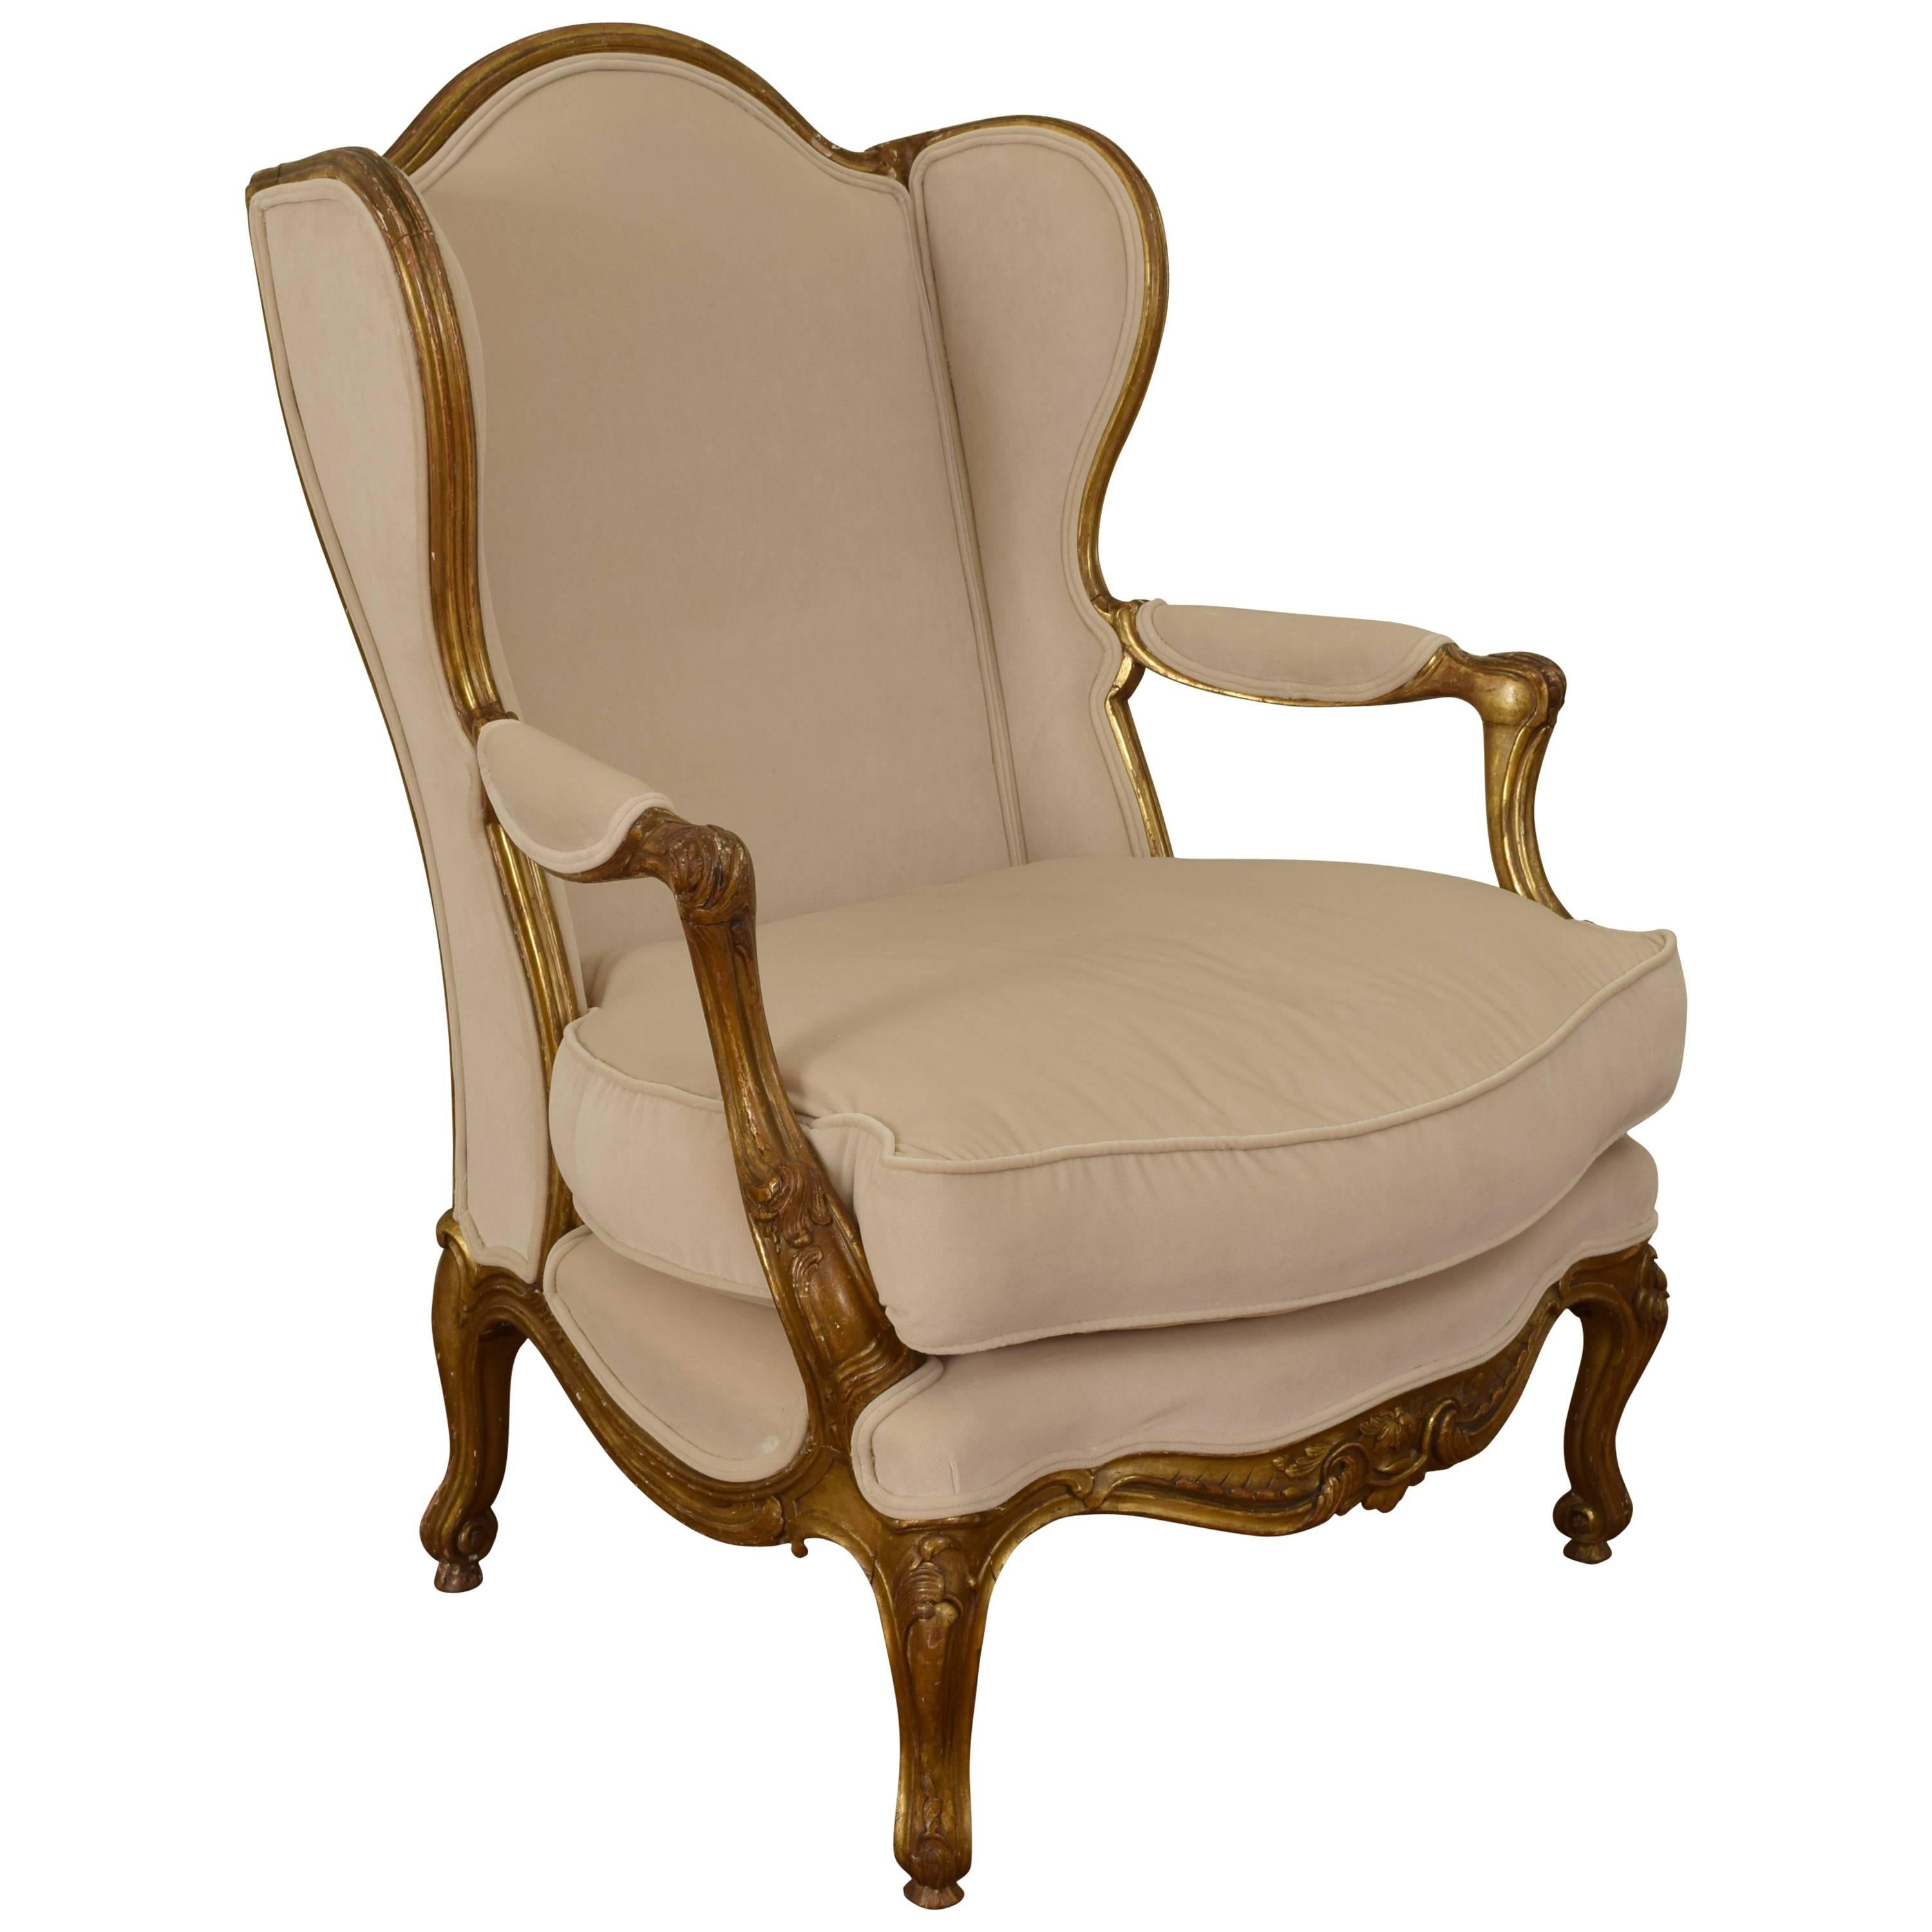 French Mid-19th Century Carved Giltwood and Upholstered Bergere